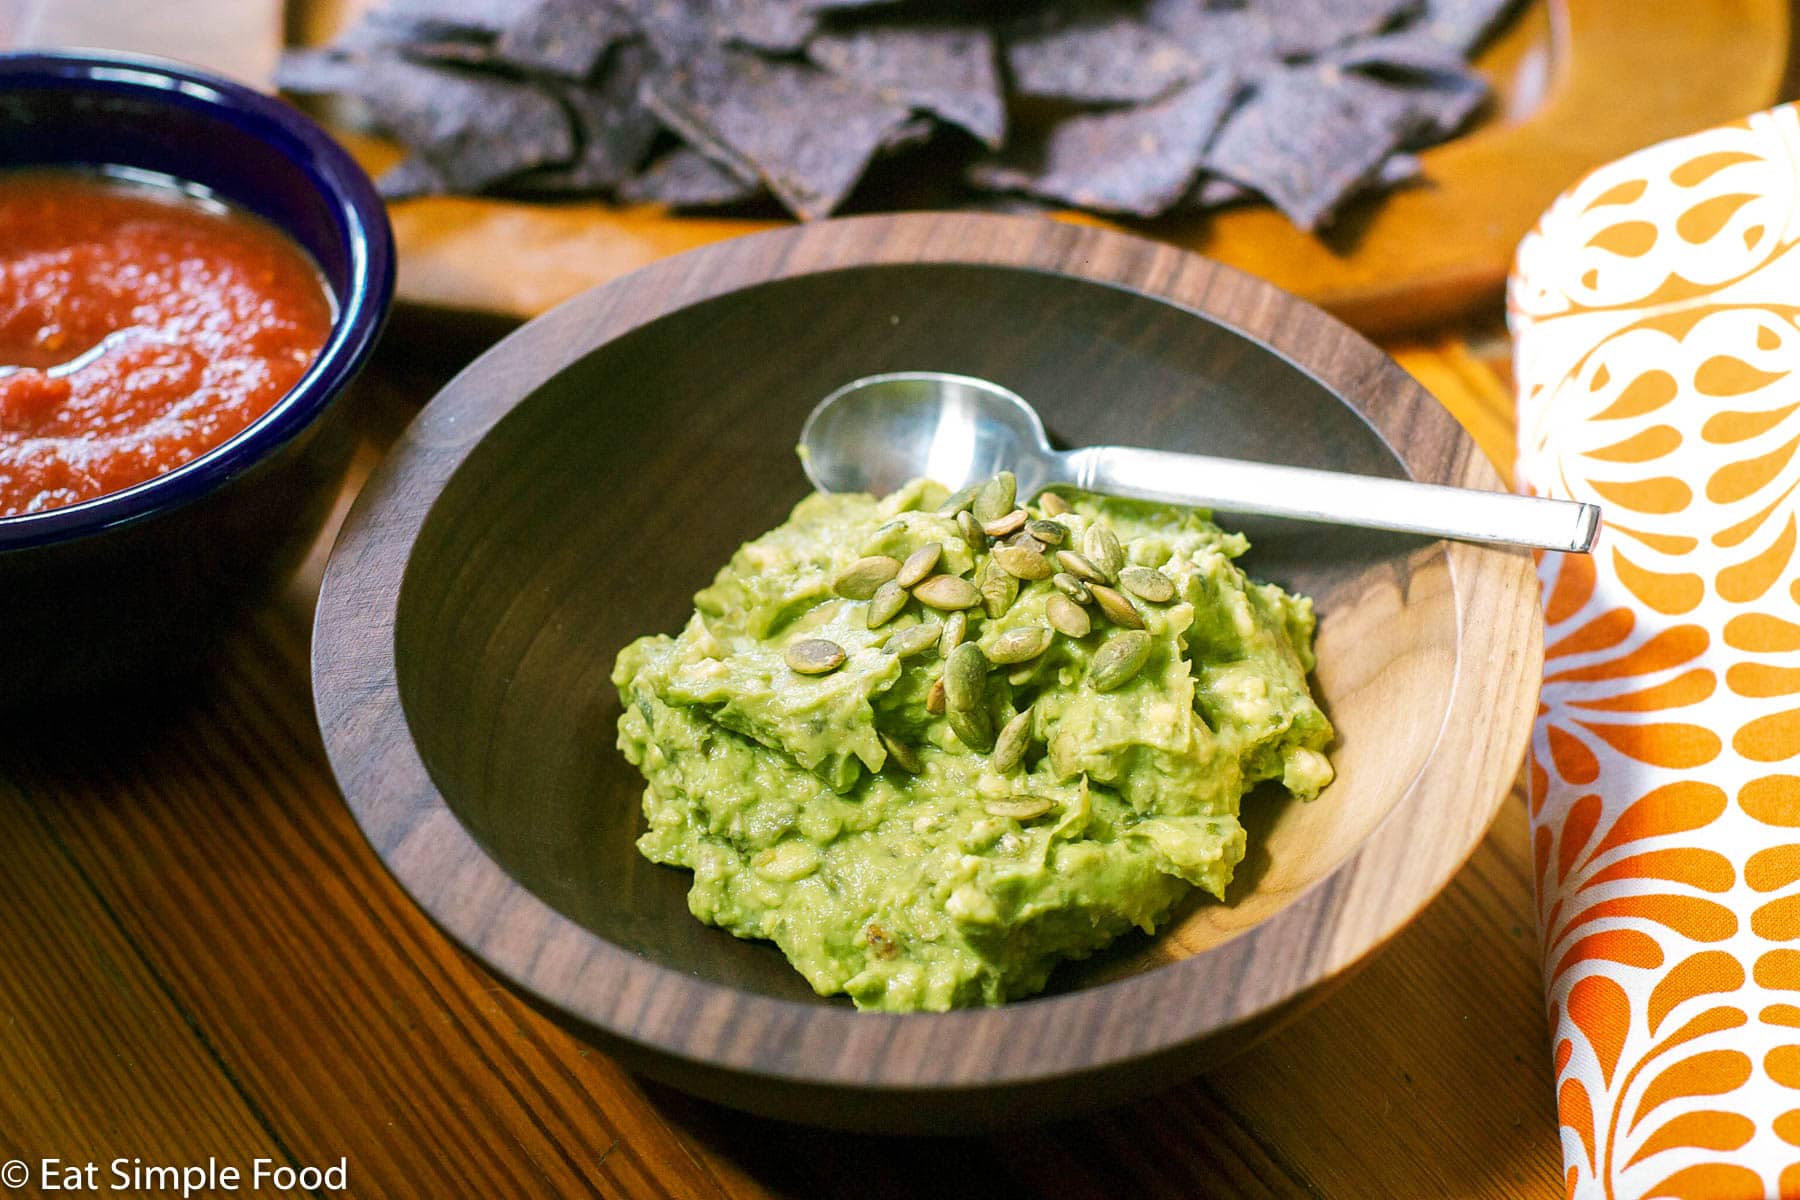 Guacamole in a wood bow with toasted pepita garnish with a spoon in bowl. Blue tortilla chips and bowl of salsa in background.